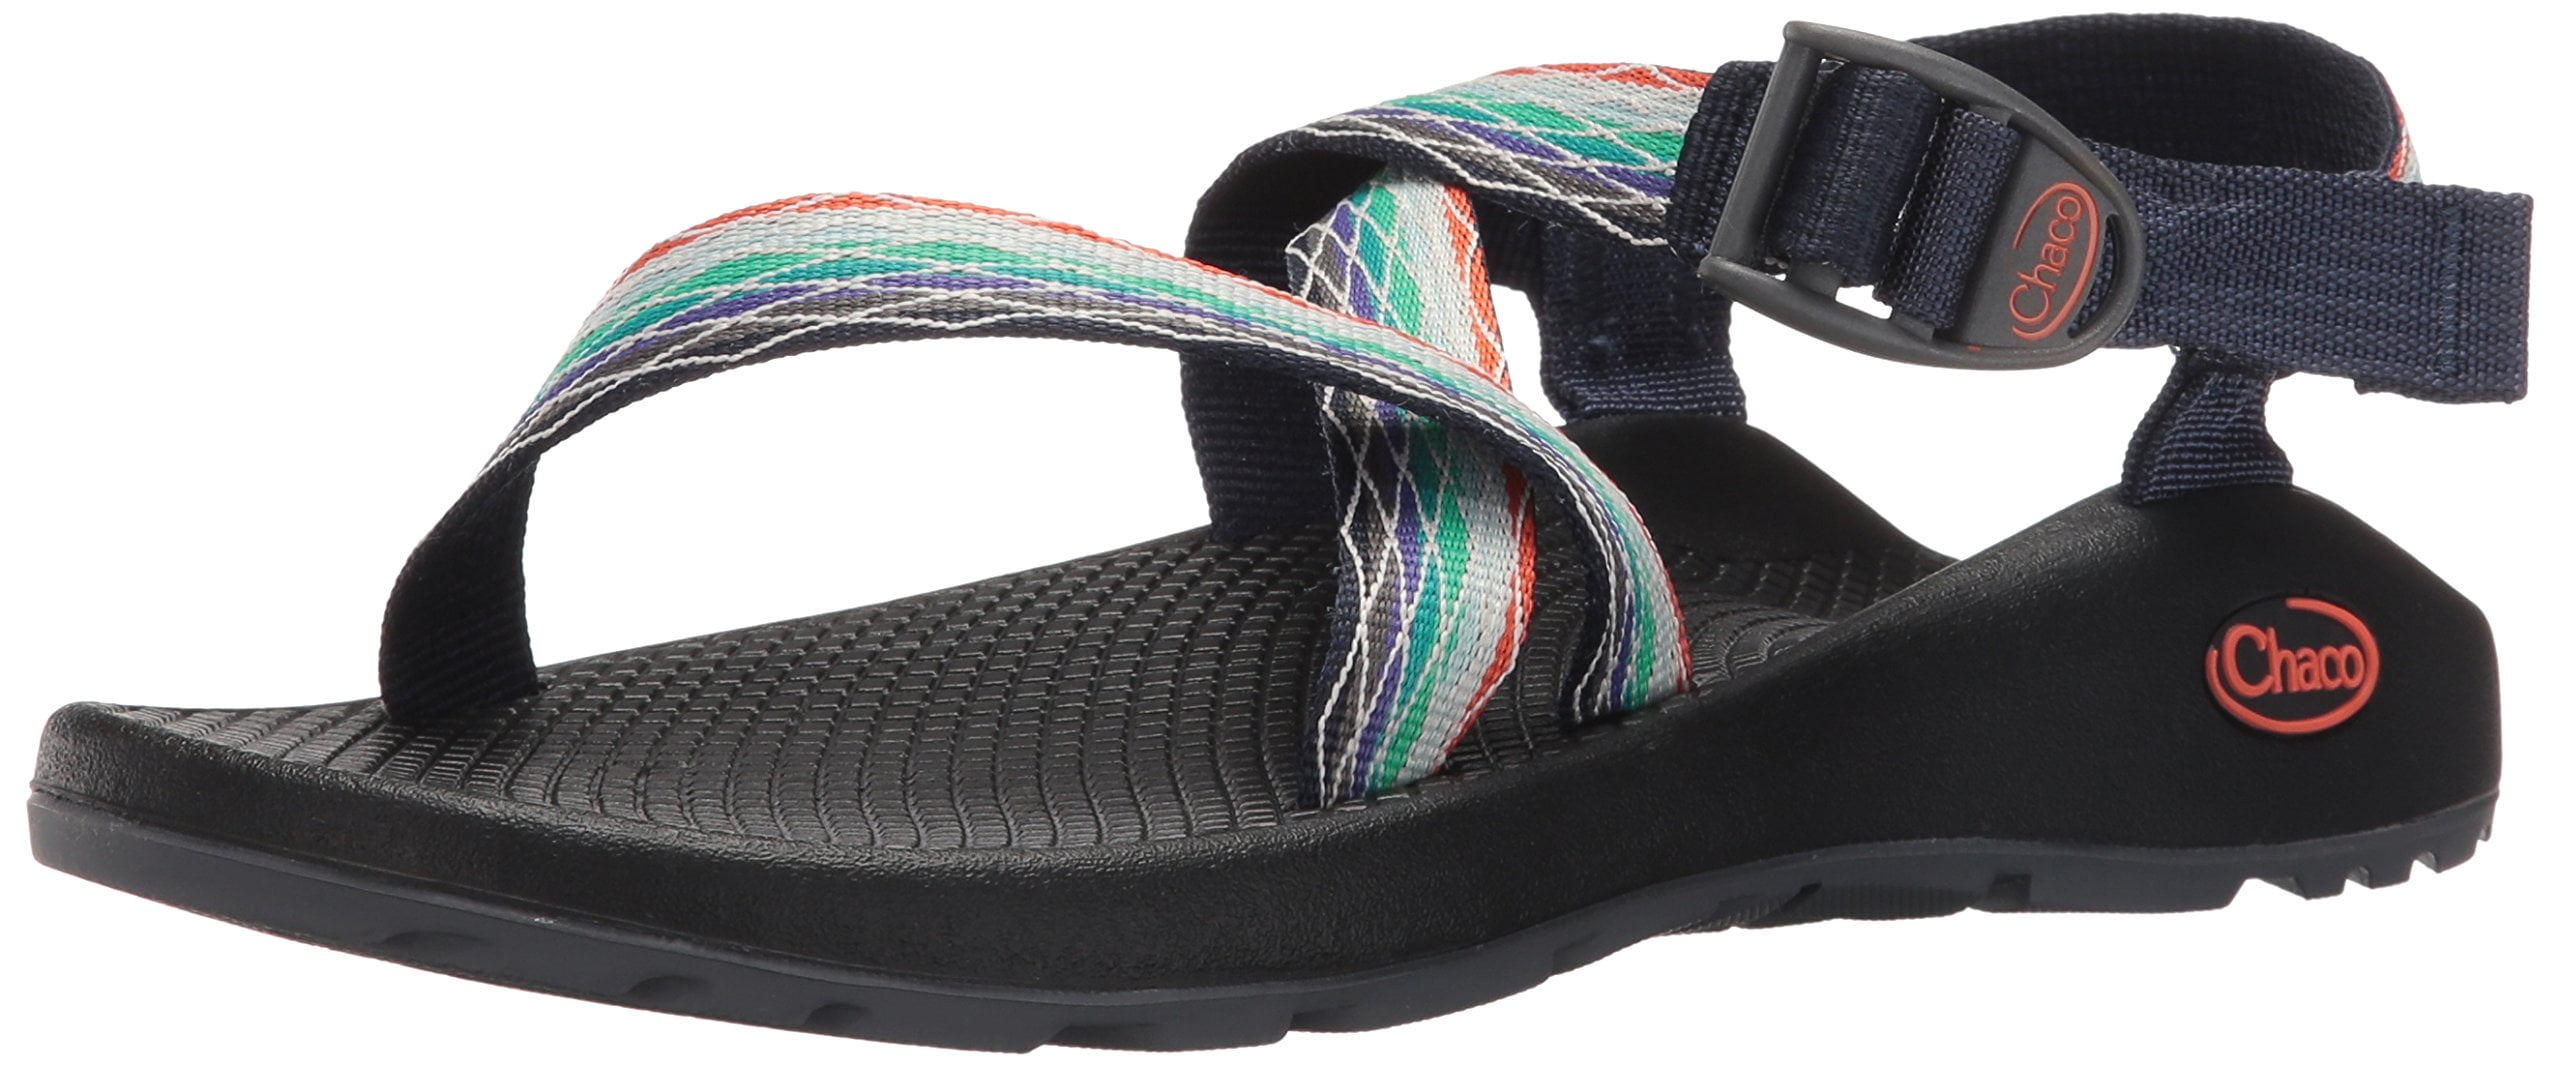 prism mint chacos